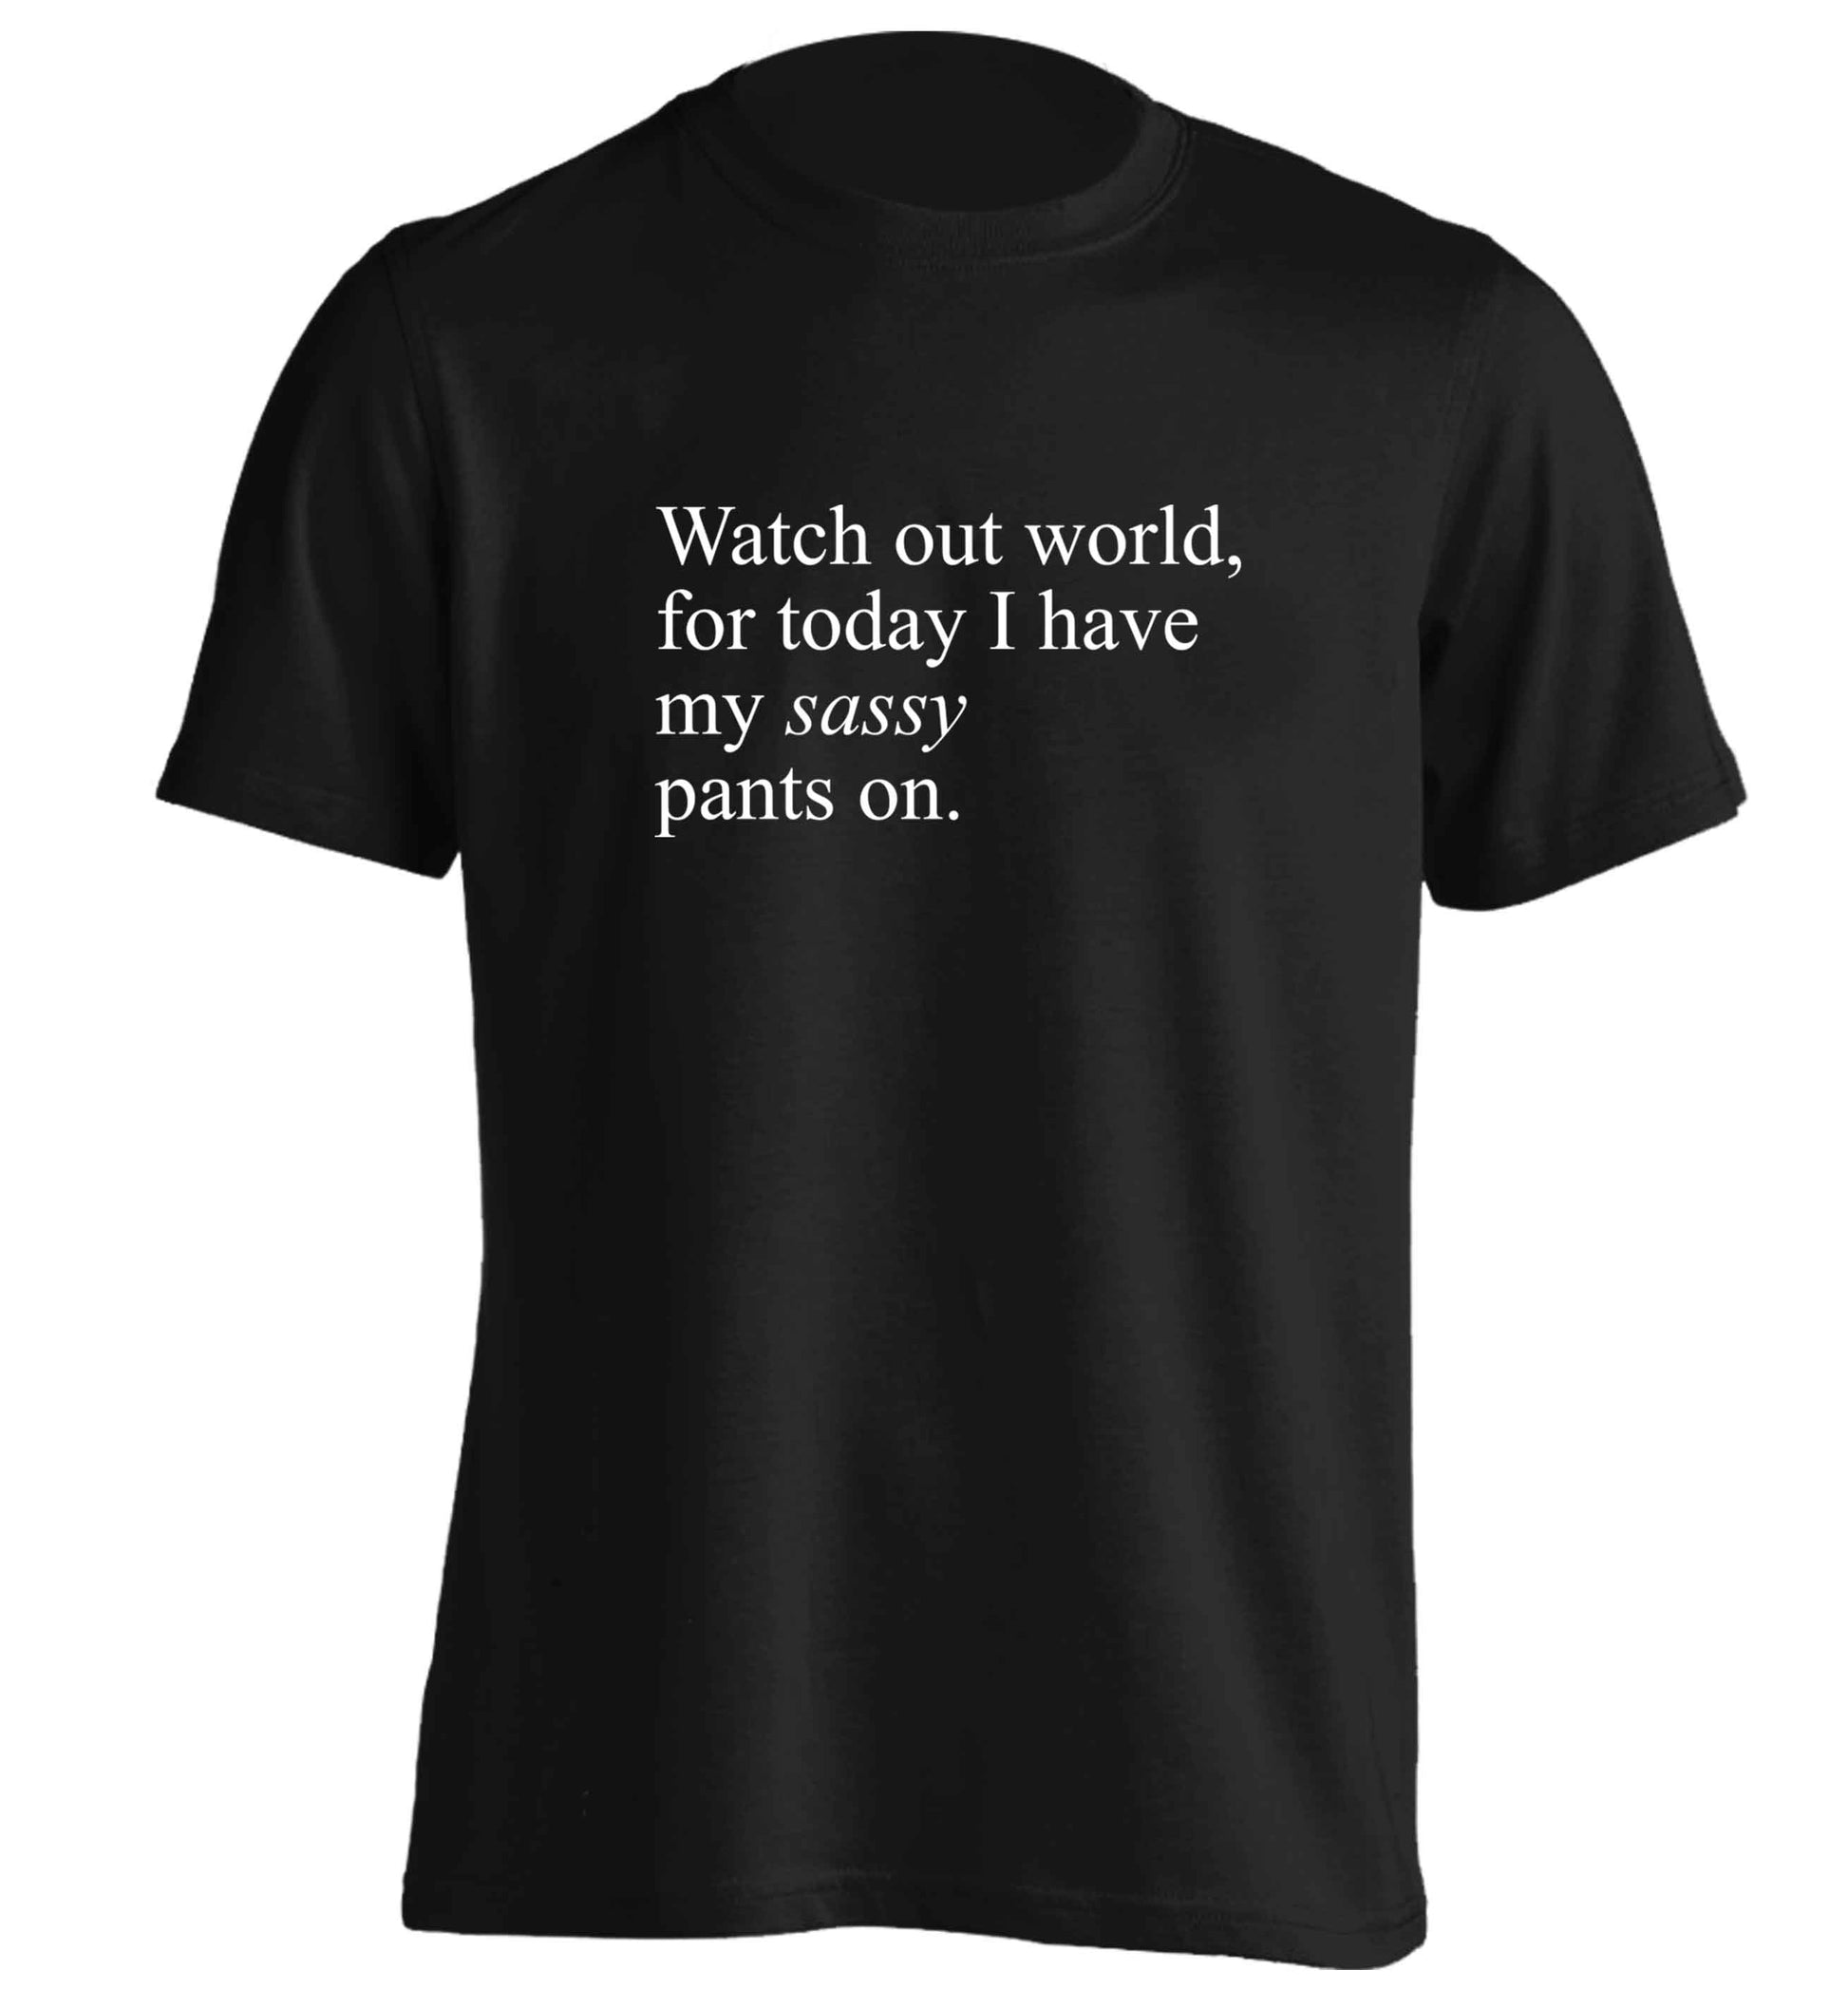 Watch out world for today I have my sassy pants on adults unisex black Tshirt 2XL